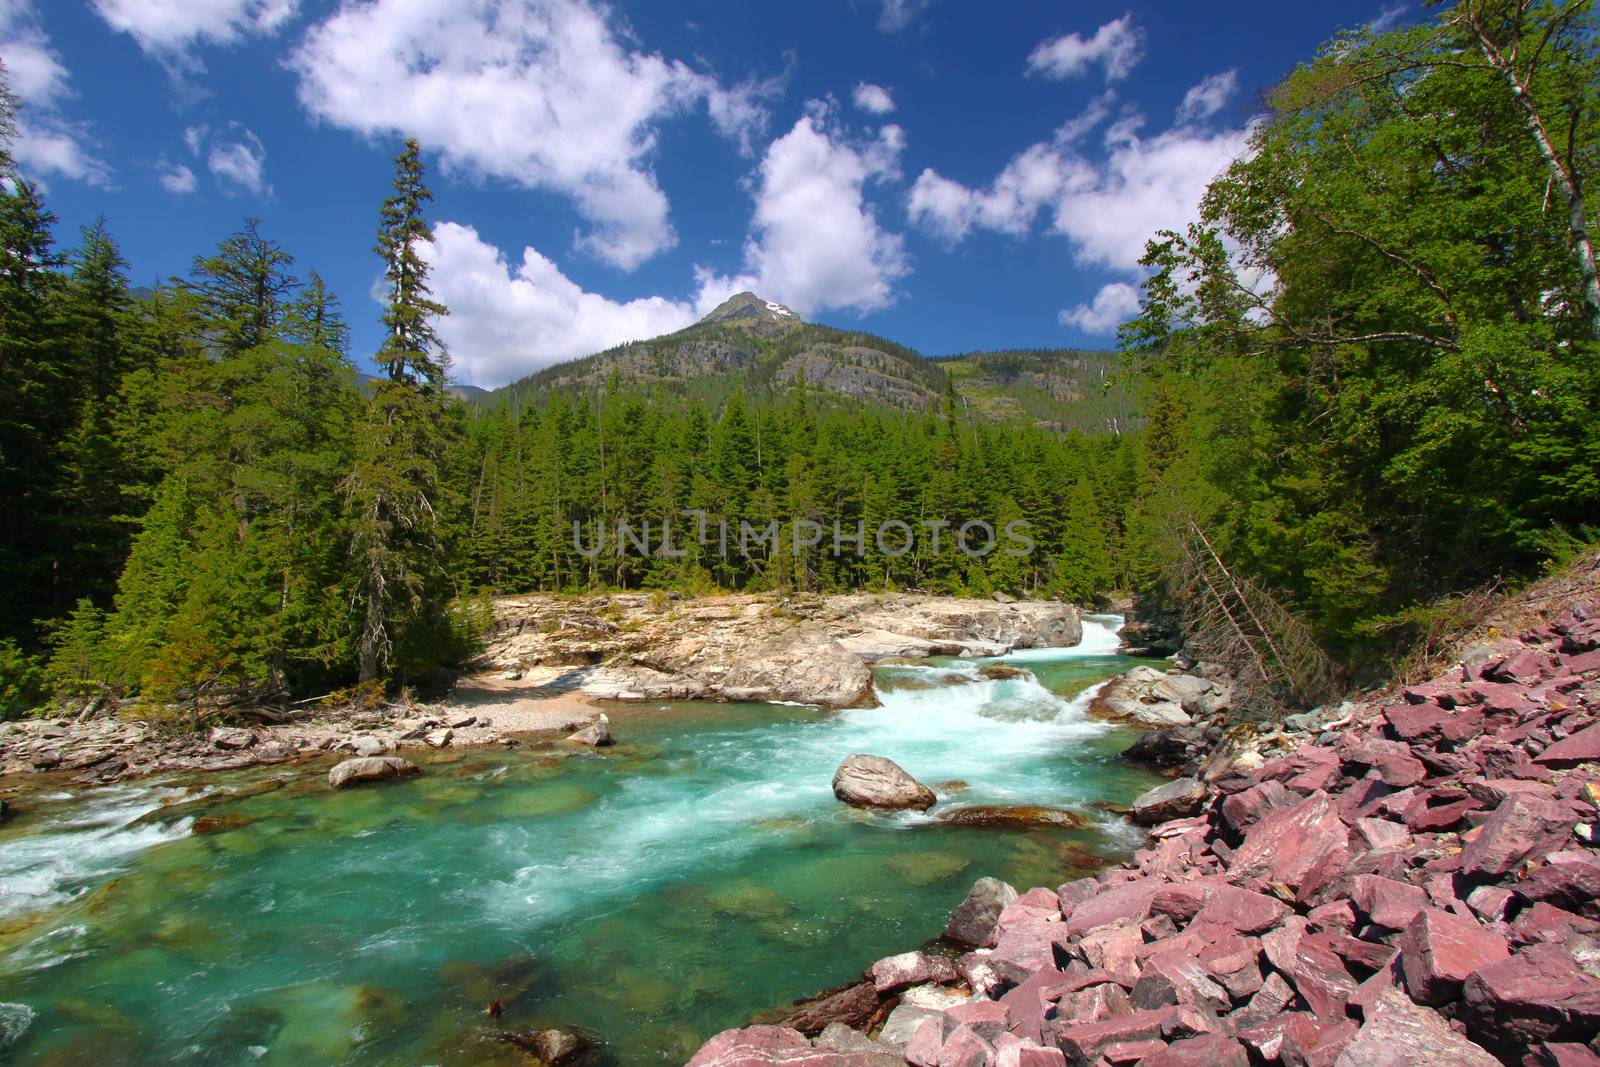 McDonald Creek flows swiftly through the forests of Glacier National Park in Montana.